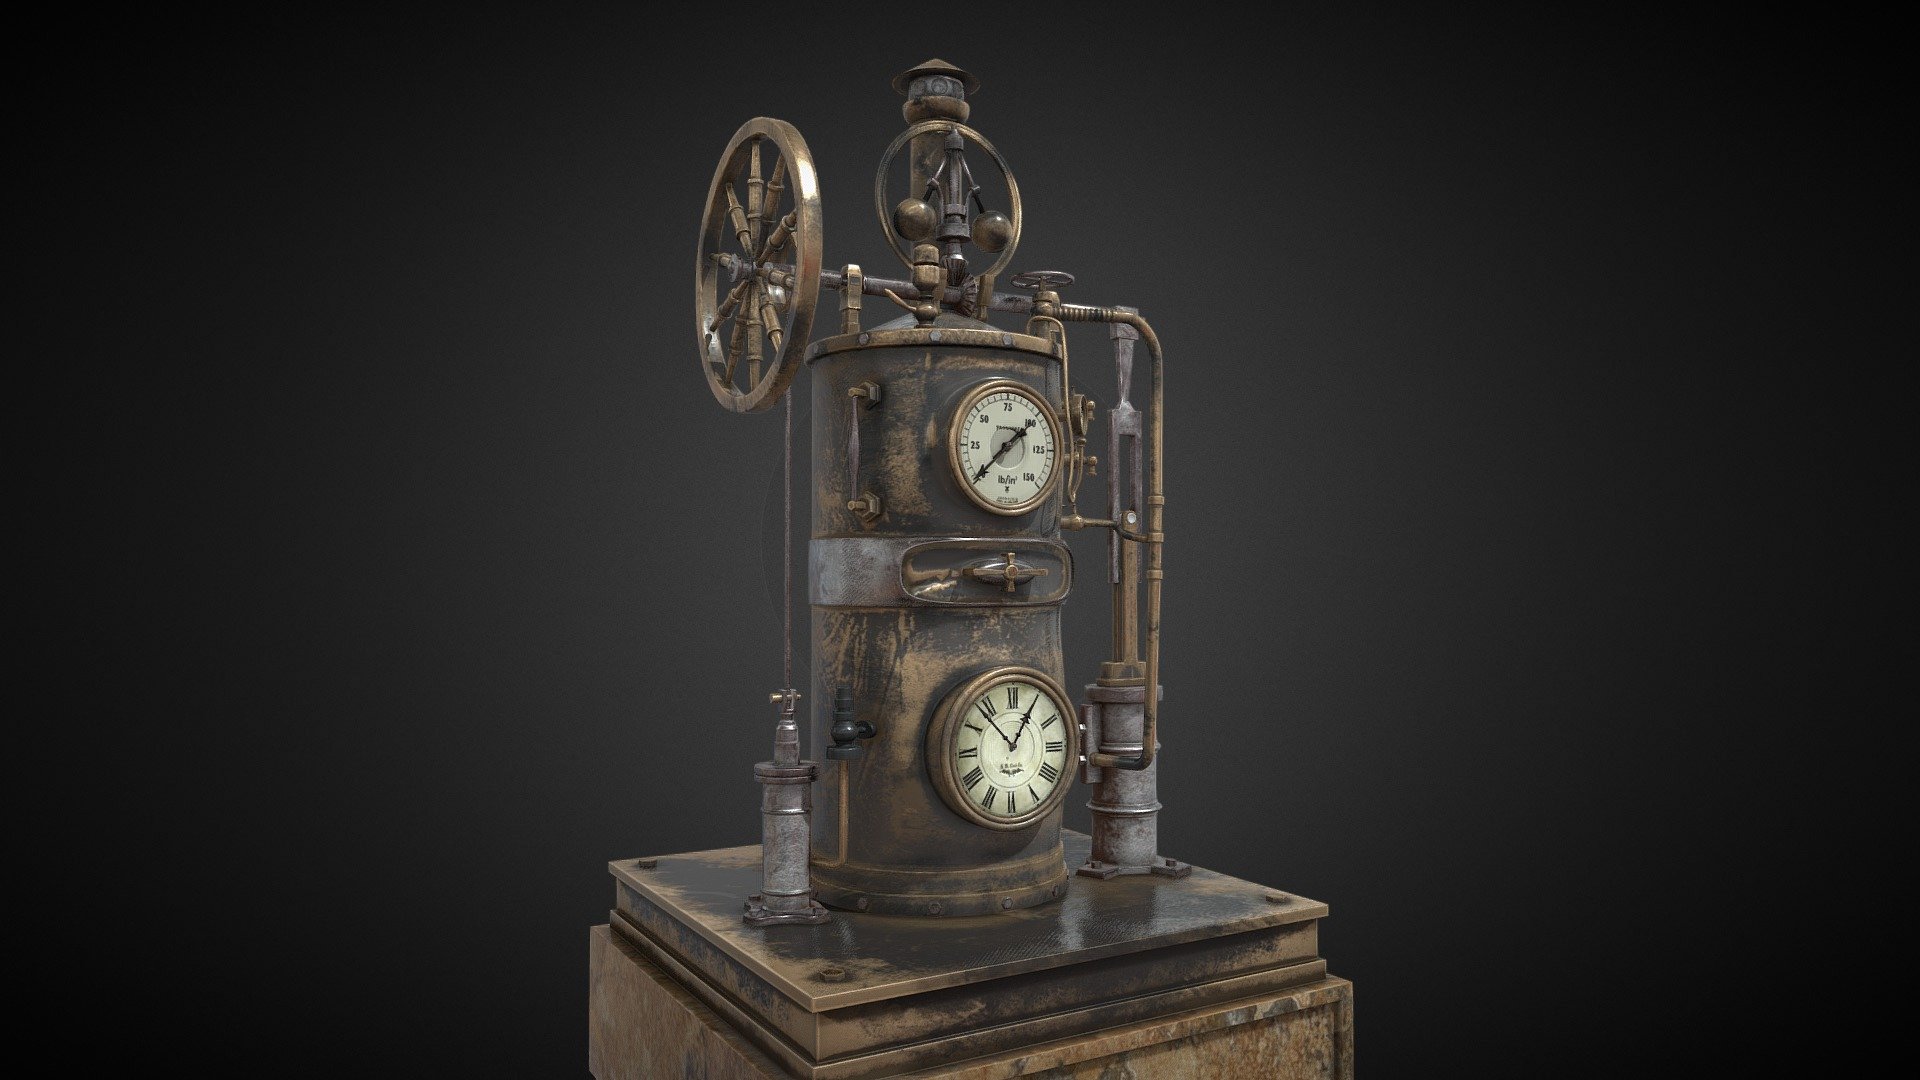 Hey guys

-This object made in blender
-unwrapped in unfold 3d
-textured in substance painter 
-rendered by V-Ray 5 in 3ds max2021



there are 4k PBR textures of this asset
it's ready to use in V-Ray , corona and Cycles .
Format included  : FBX - OBJ - Max - Blend

vertex : 565.344
polygon : 562.693



More Products 

Pirate Hat 1 : https://sketchfab.com/3d-models/pirate-hat-1-game-asset-cb6aa7e3896c46e1a2a960bd6dce6985
Pirate Hat 4 : https://sketchfab.com/3d-models/pirate-hat-4-game-asset-73b37463cfba43d5852266501e9c2346 - Steampunk Engine - 3D model by bridge_studio 3d model